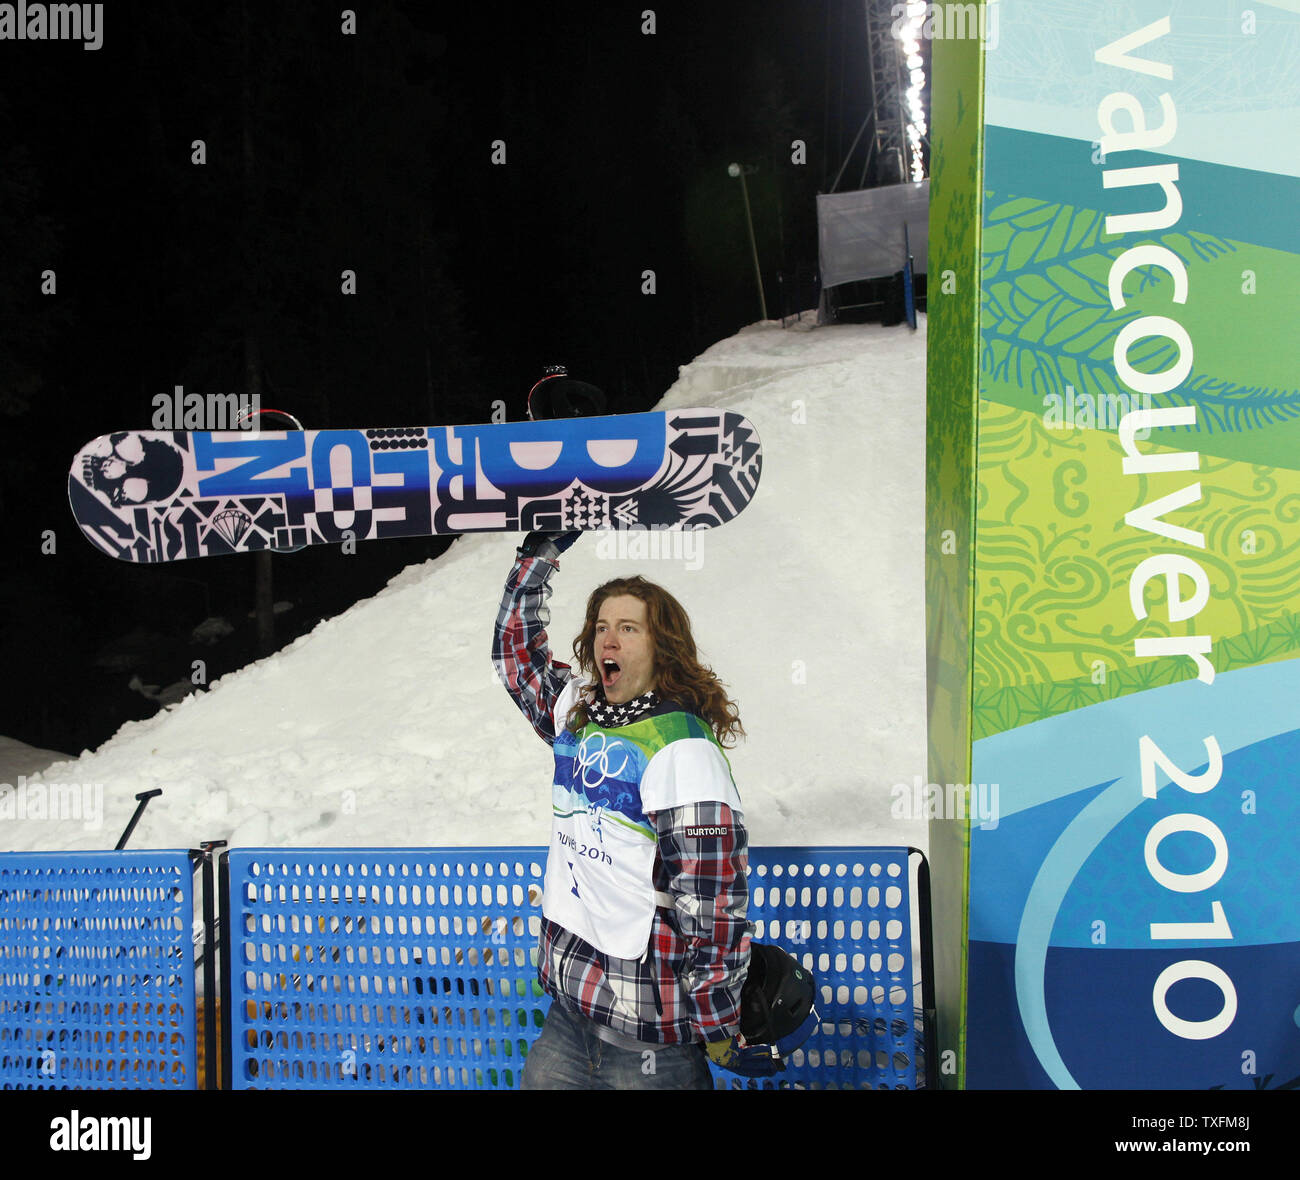 Shaun White of the United States reacts after his first run in the